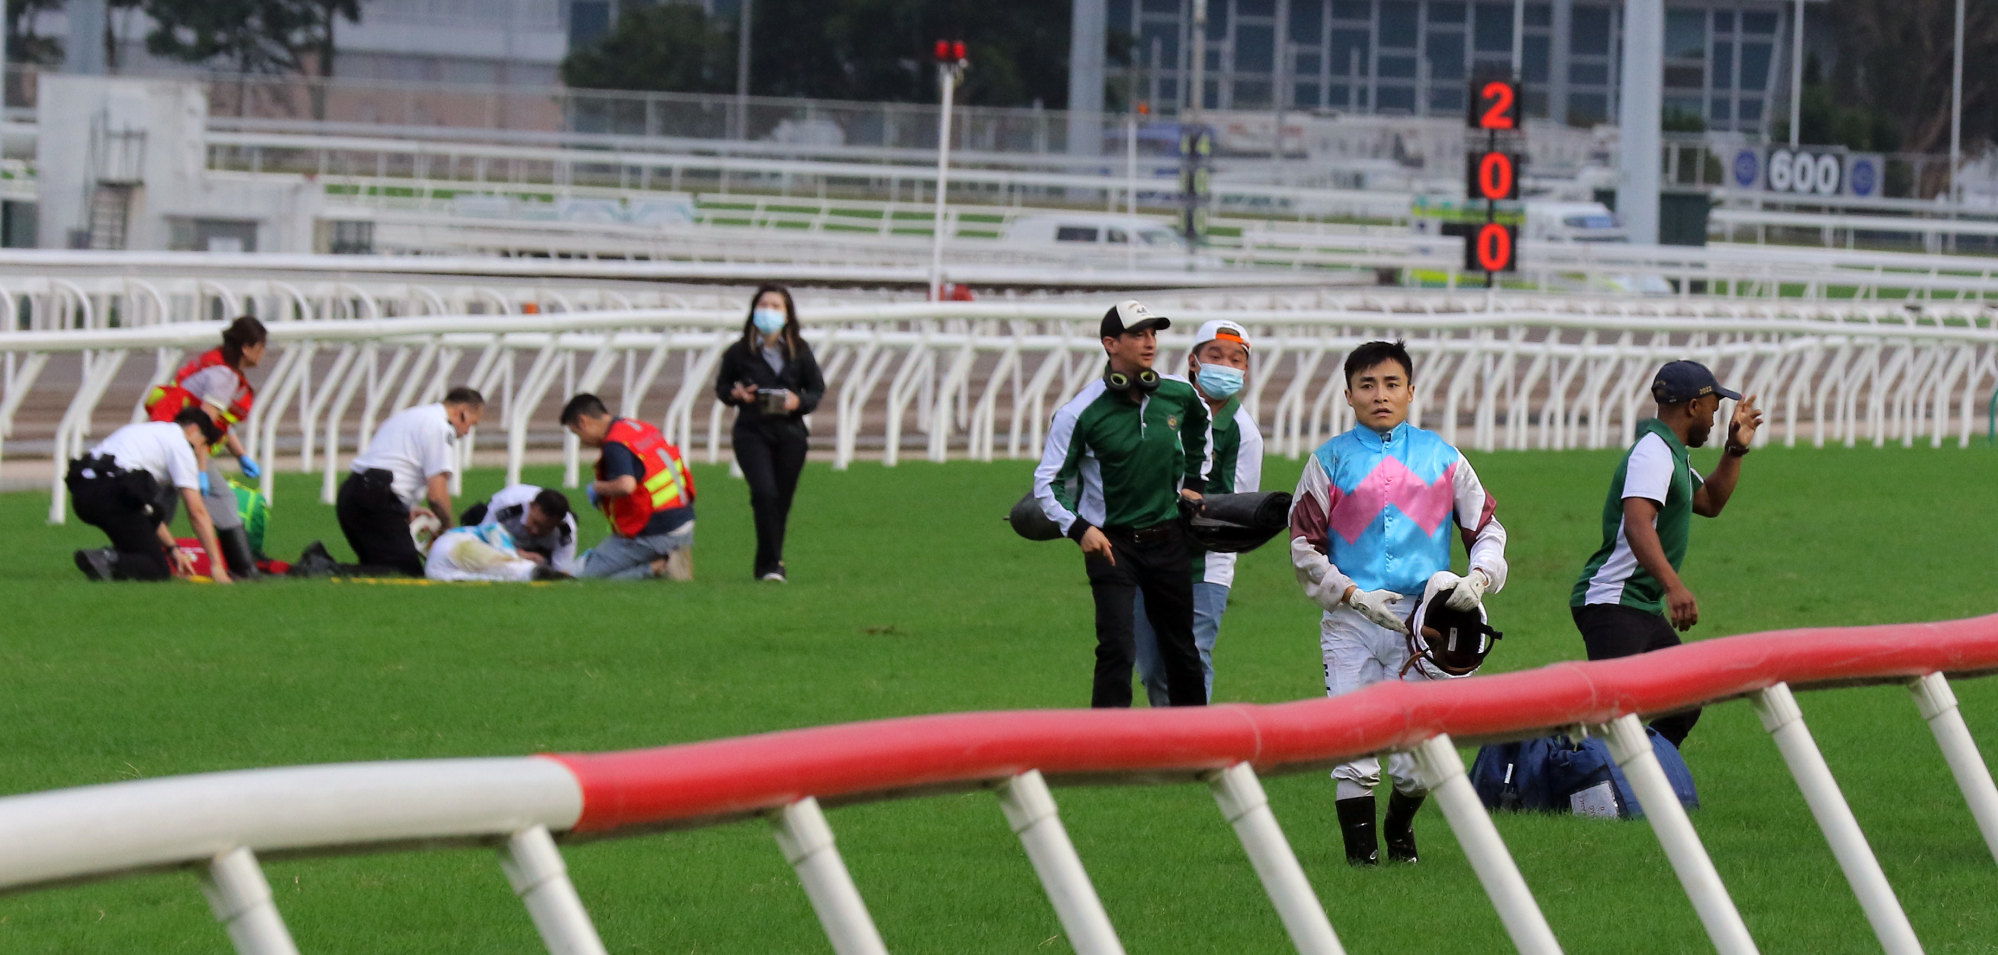 Medical staff attend to Hugh Bowman following the Panasonic Cup race fall as Keith Yeung walks off the track.